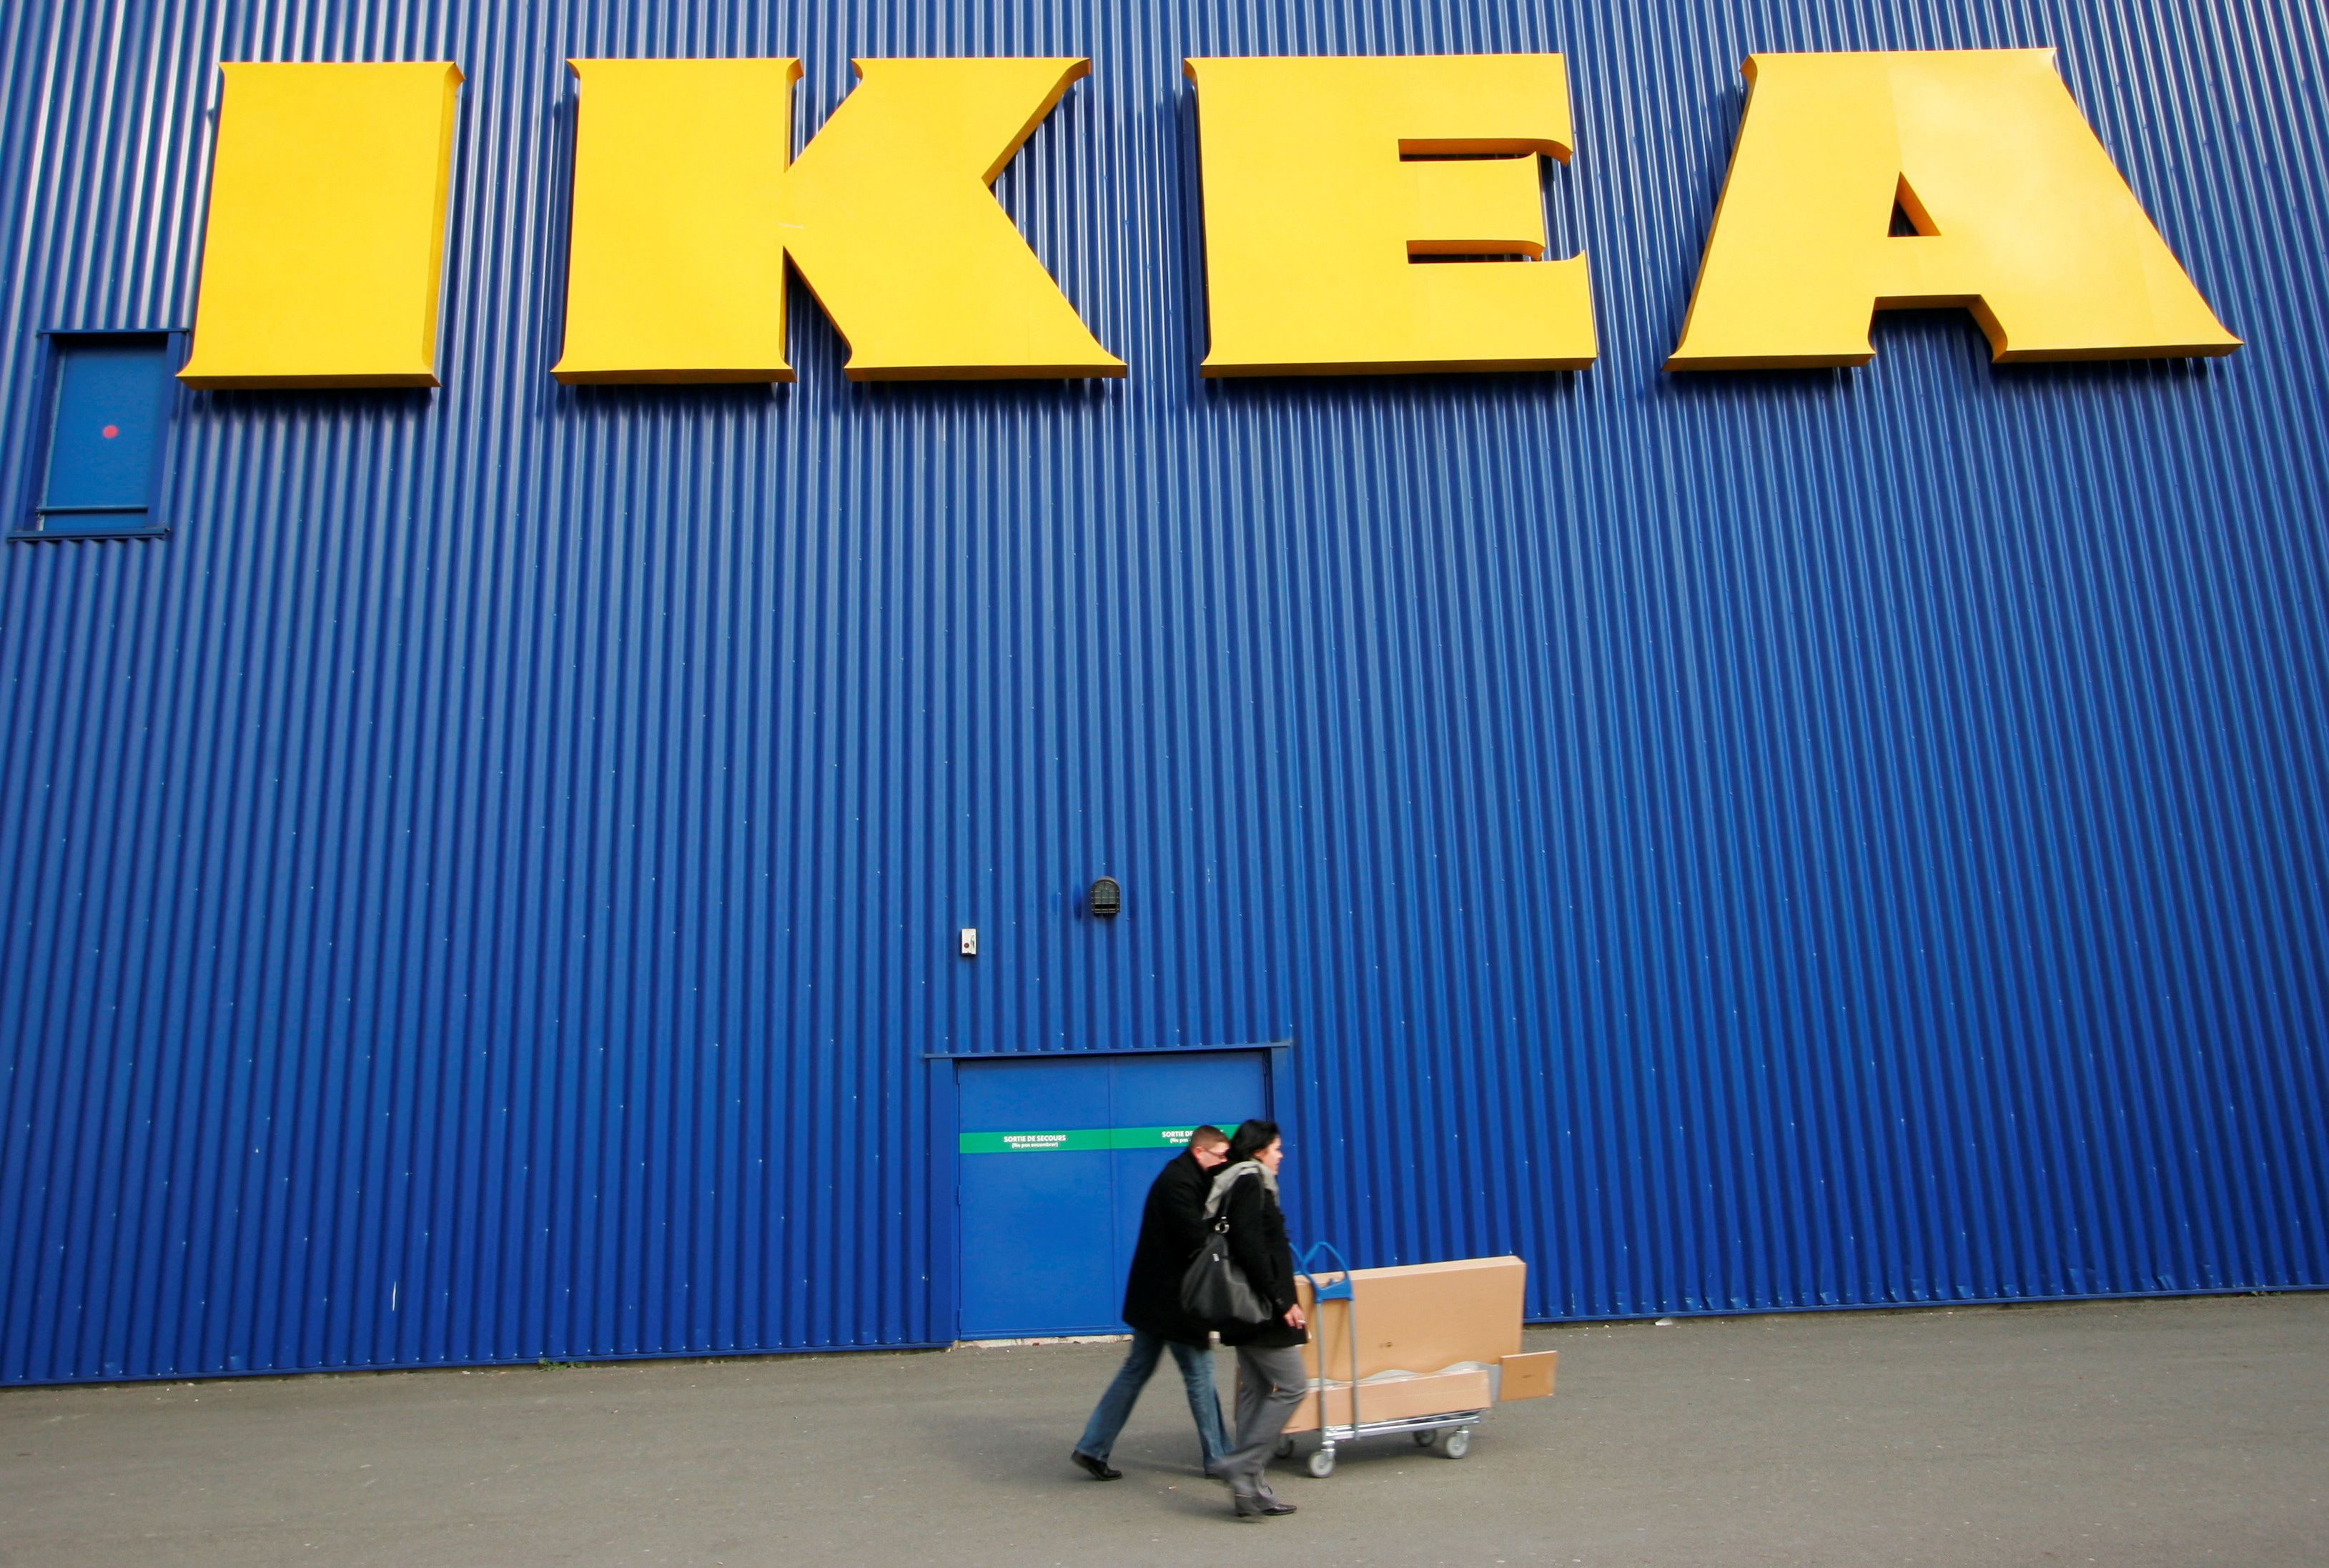 People push a shopping cart past a warehouse of the Swedish furniture maker IKEA in Bordeaux